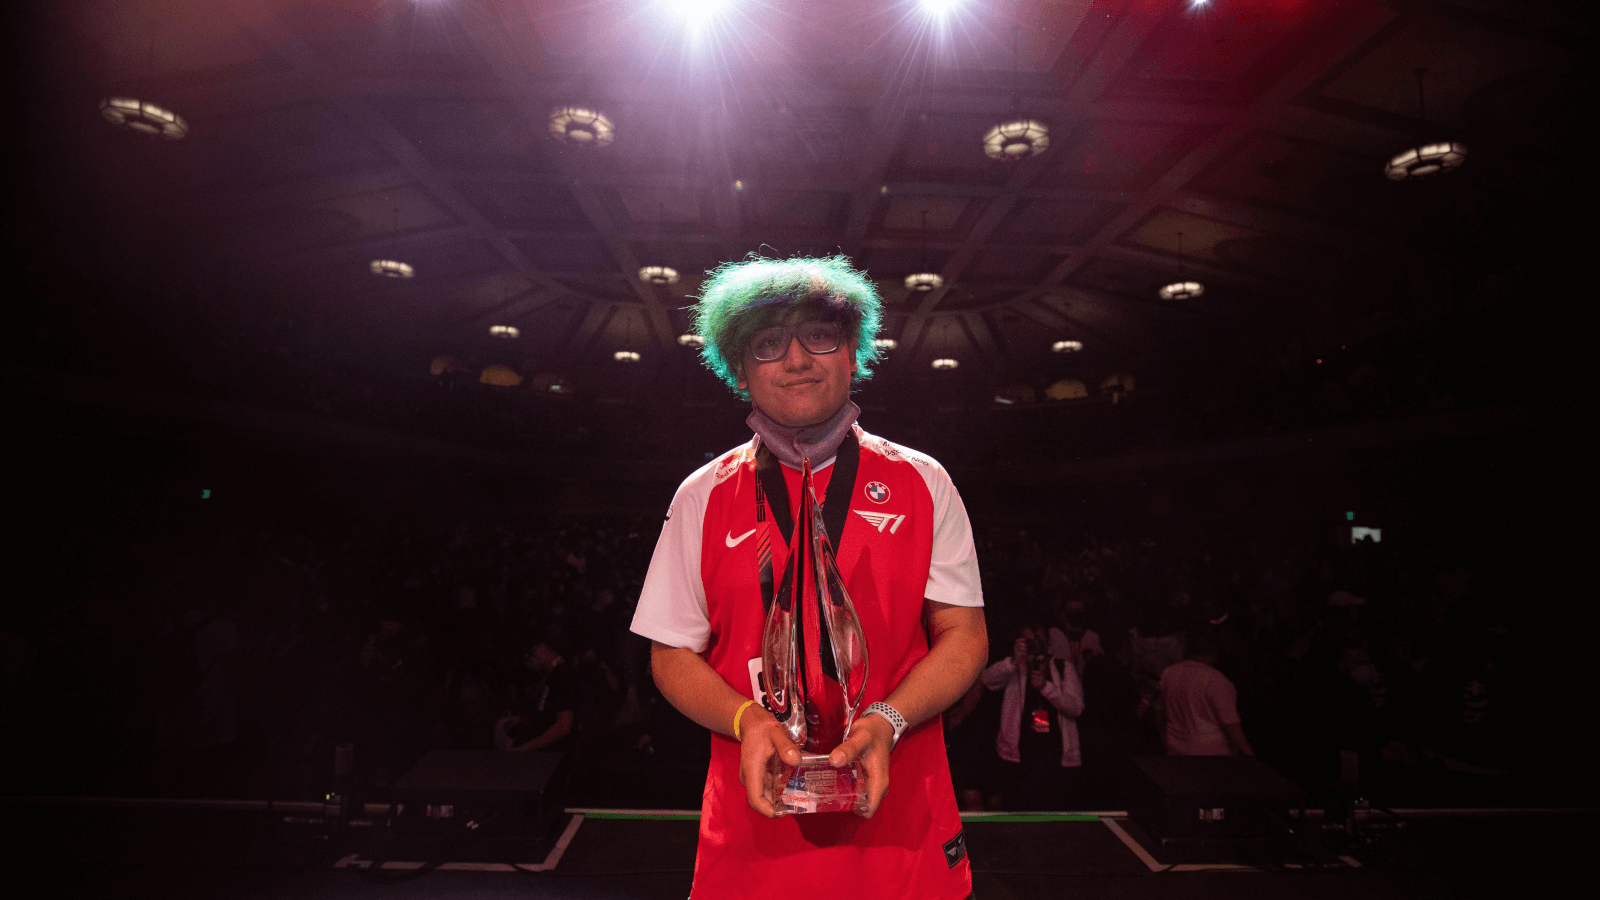 MkLeo takes top step at GENESIS 8 With Frenchman Glutonny right behind